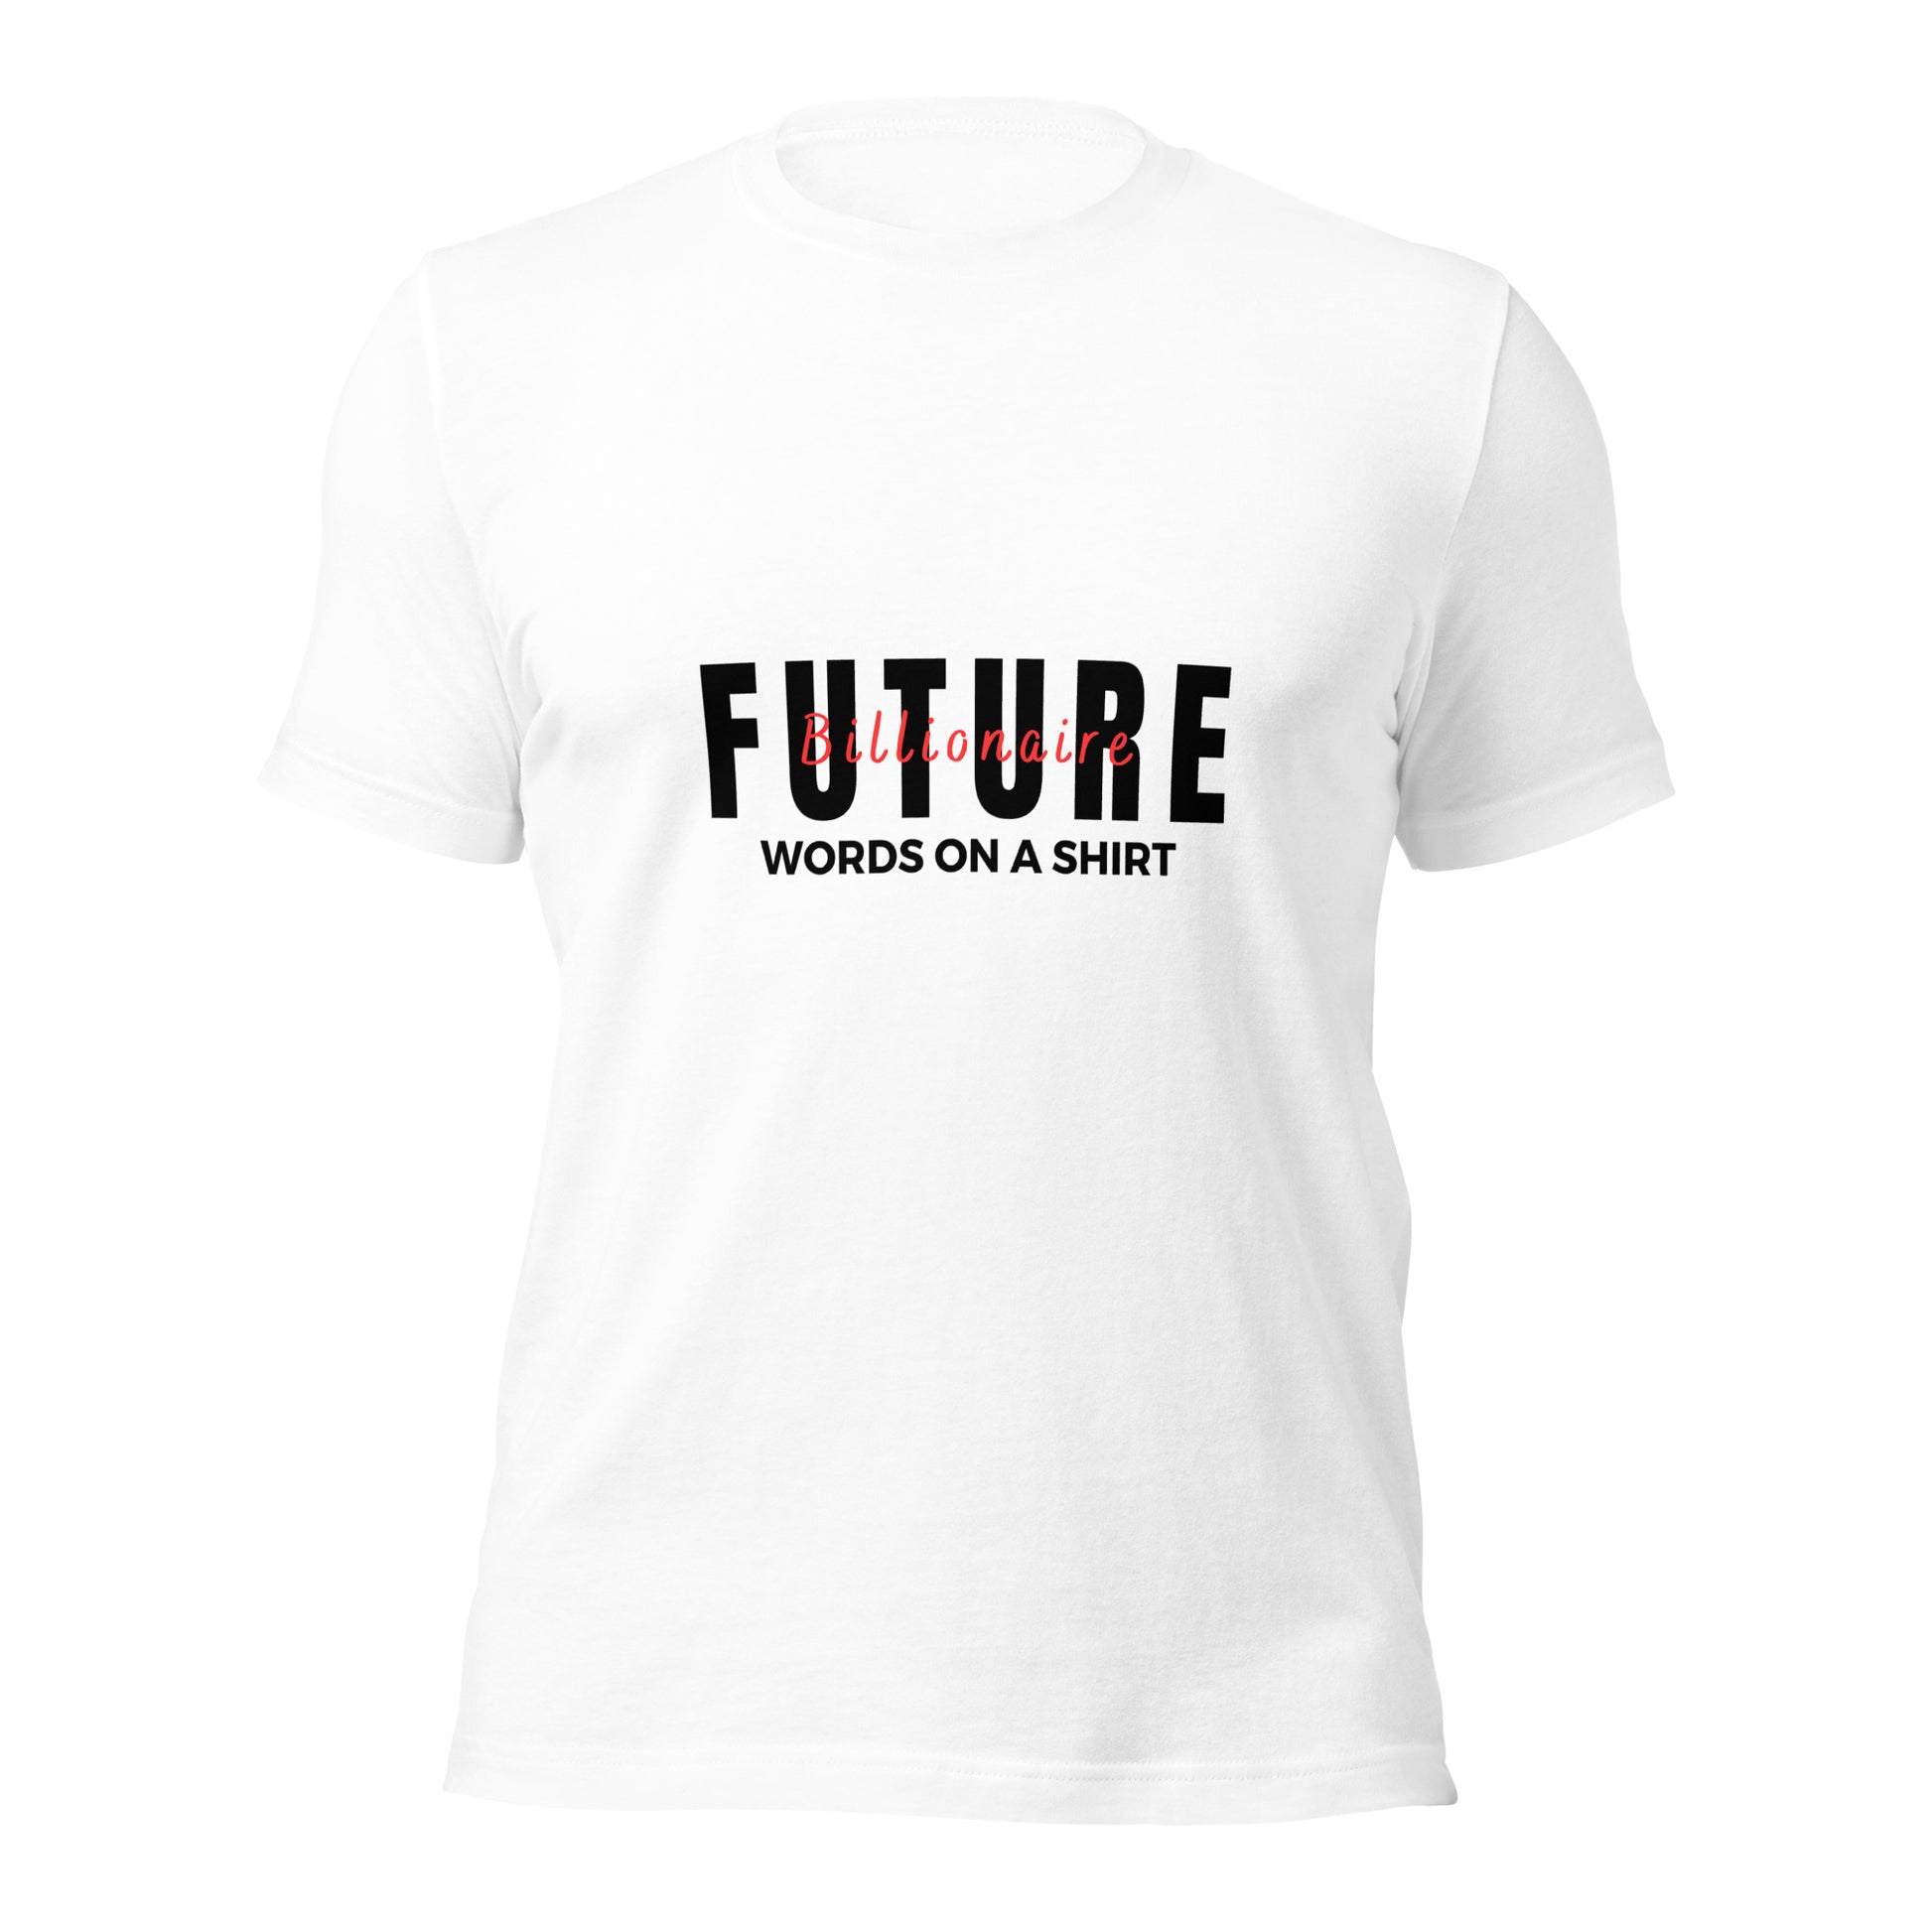 Get ready to conquer the world in style with our Future Billionaire unisex t-shirt. Made from soft, lightweight, and stretchy material, it's perfect for anyone who's destined for greatness. Don't miss out on this must-have shirt for all you future billionaires out there!